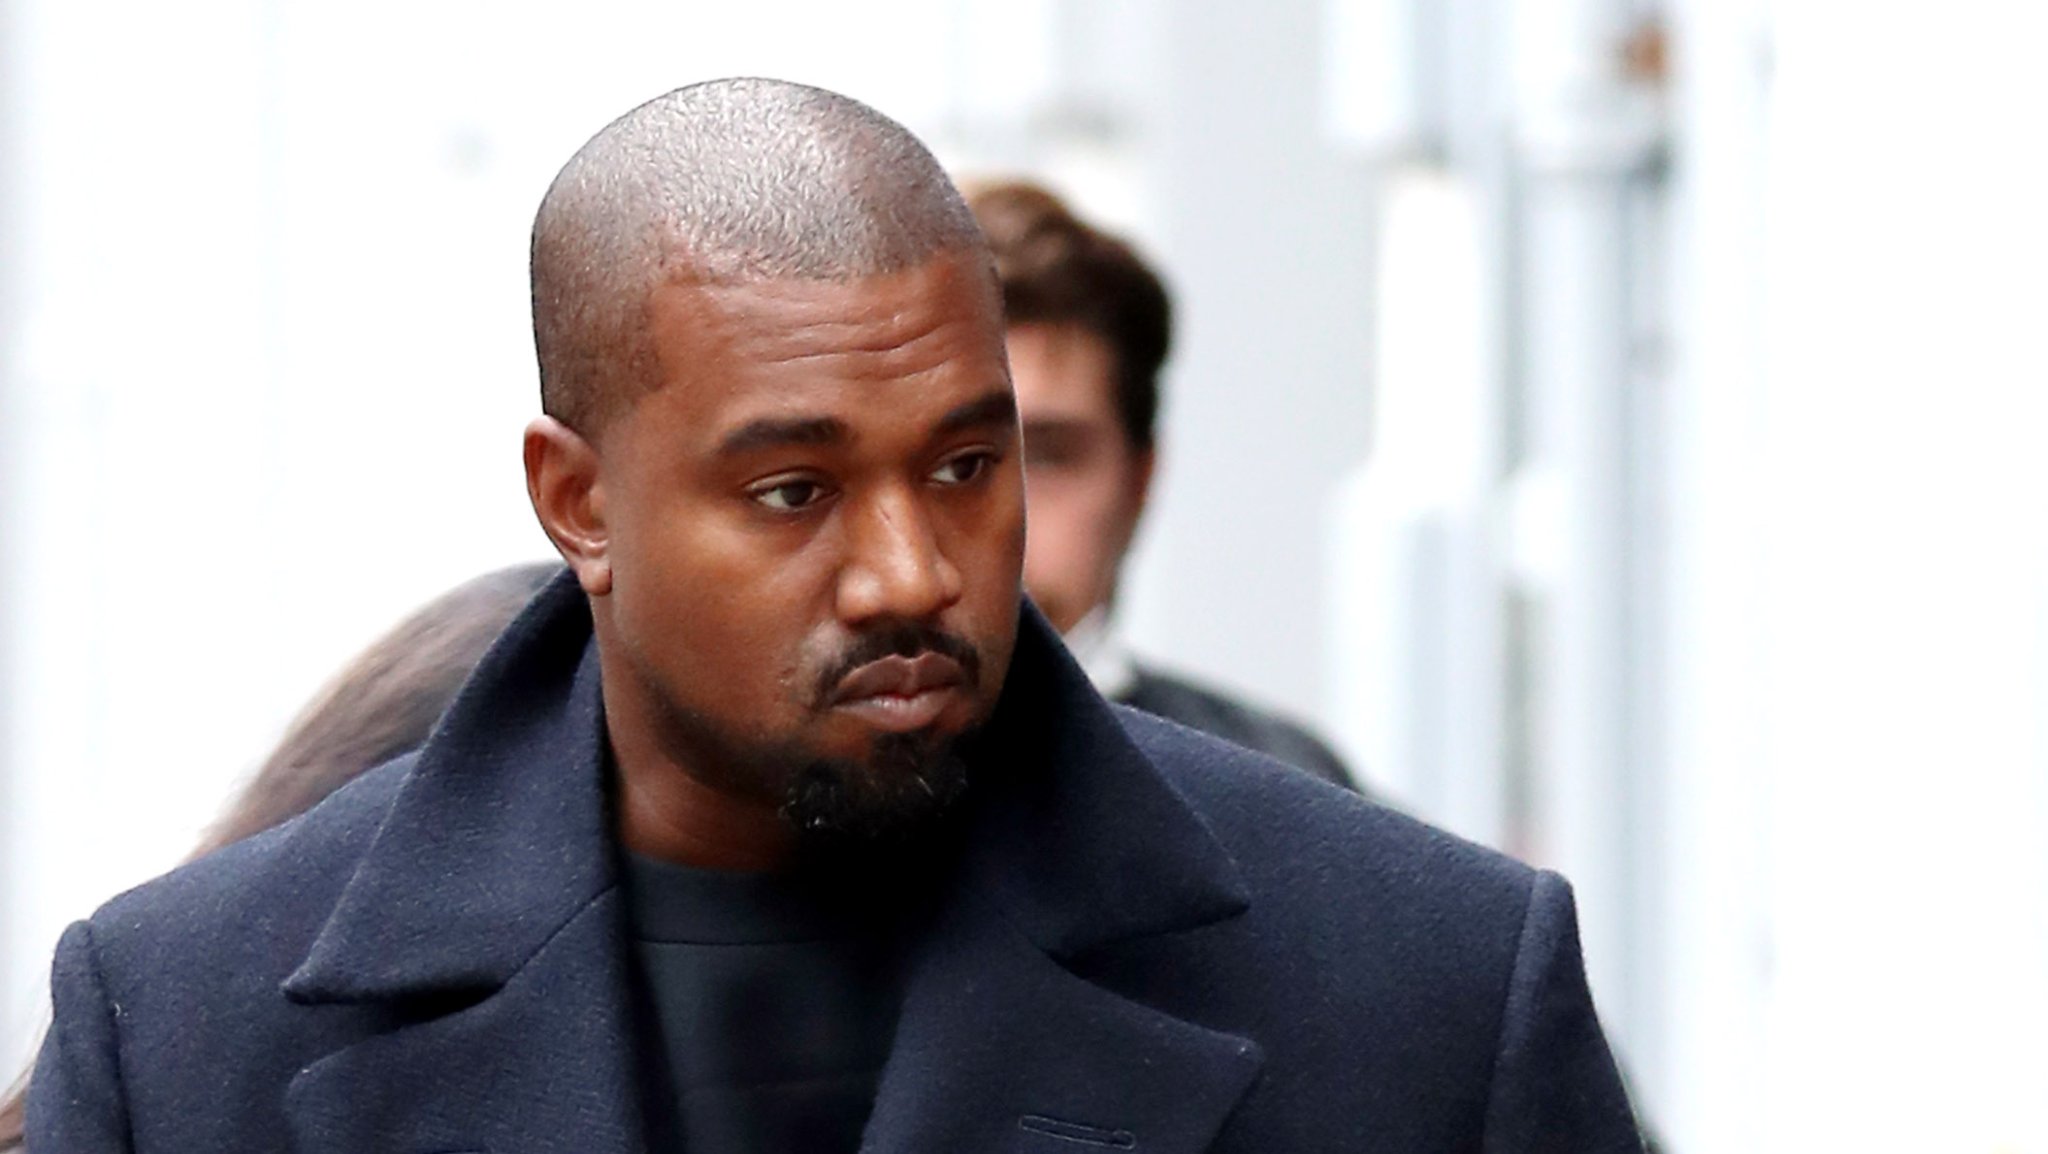 The Internet Is Having A Field Day Roasting Kanye West’s New Shoes